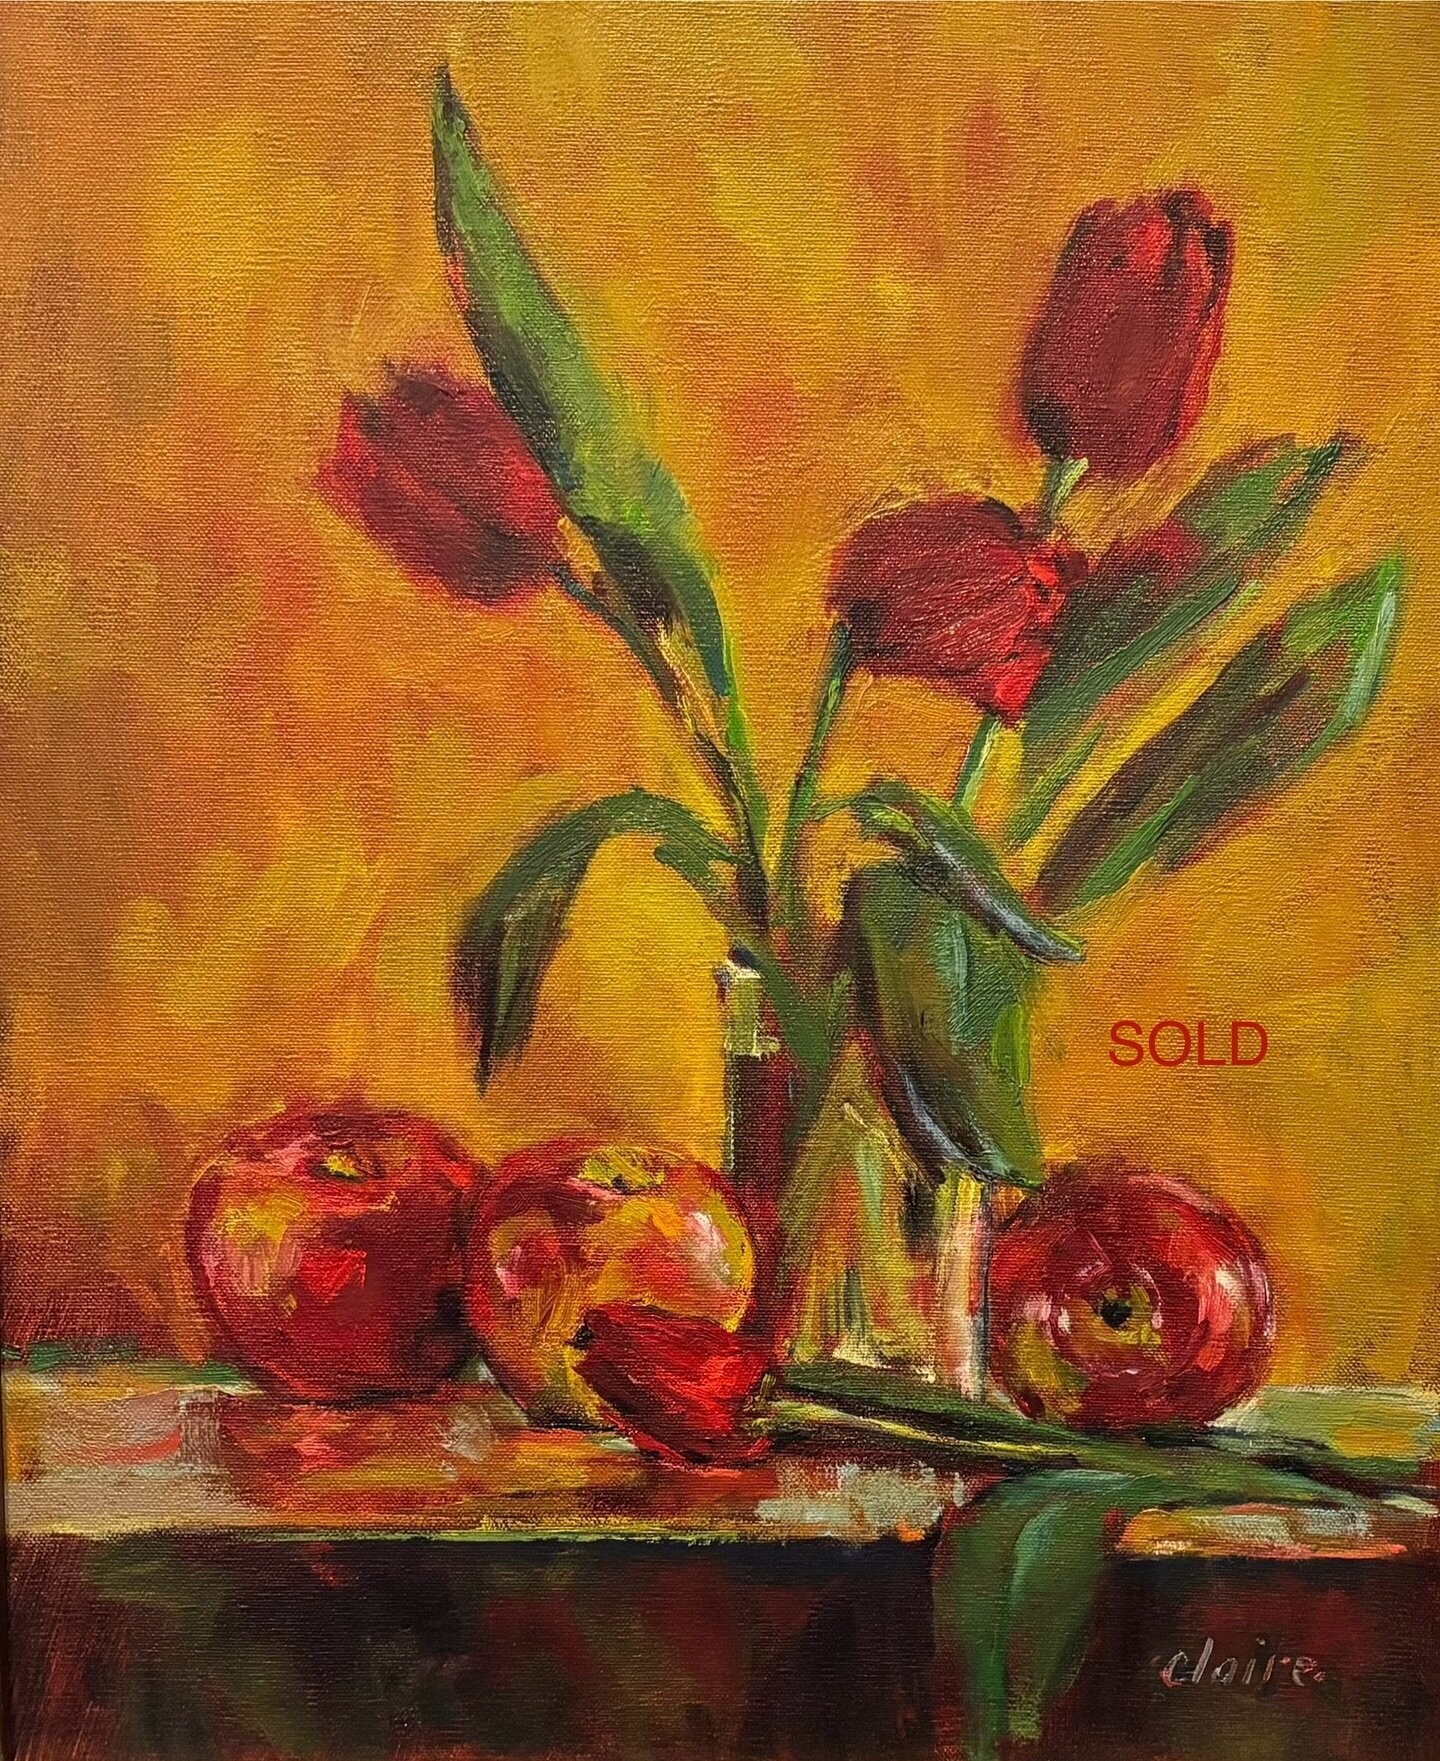 SOLD! &ldquo;Tuscan Still Life&rdquo;  by Claire Hardy&hellip;a beautiful birthday gift for our clients wife. ❤️ #happybirthday 
.
For more available artwork by Claire Hardy stop by the gallery and see us or follow the website link in the bio and CLI